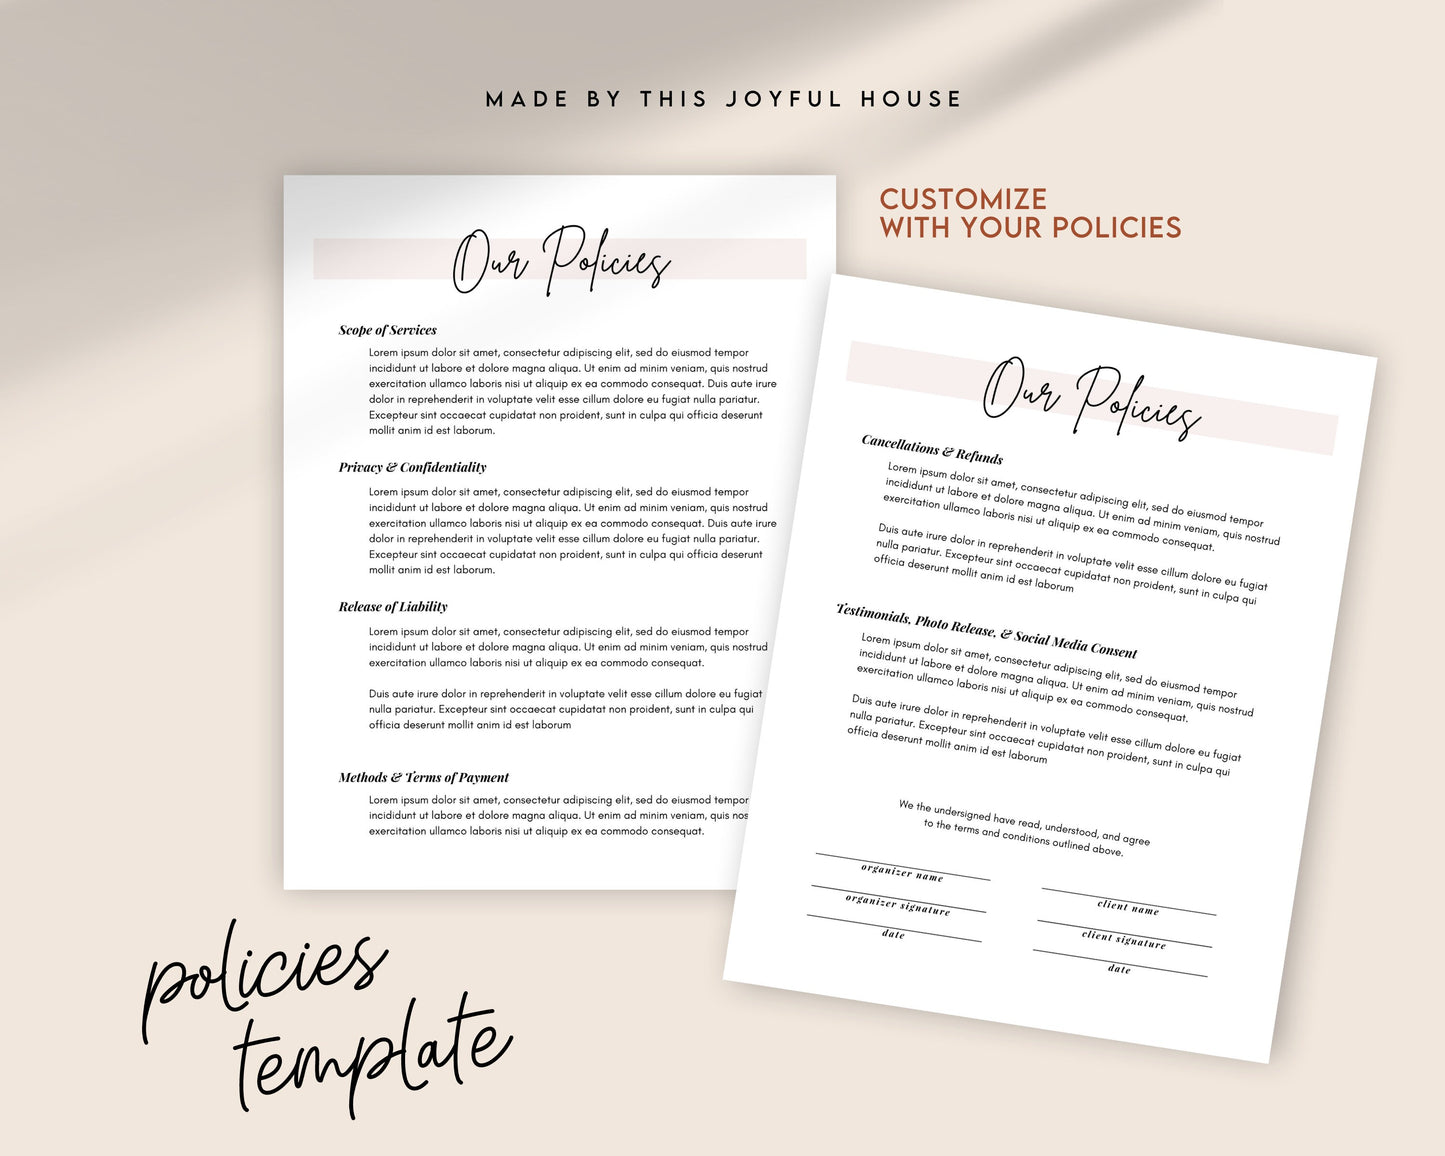 New Client Welcome Packet Canva Template